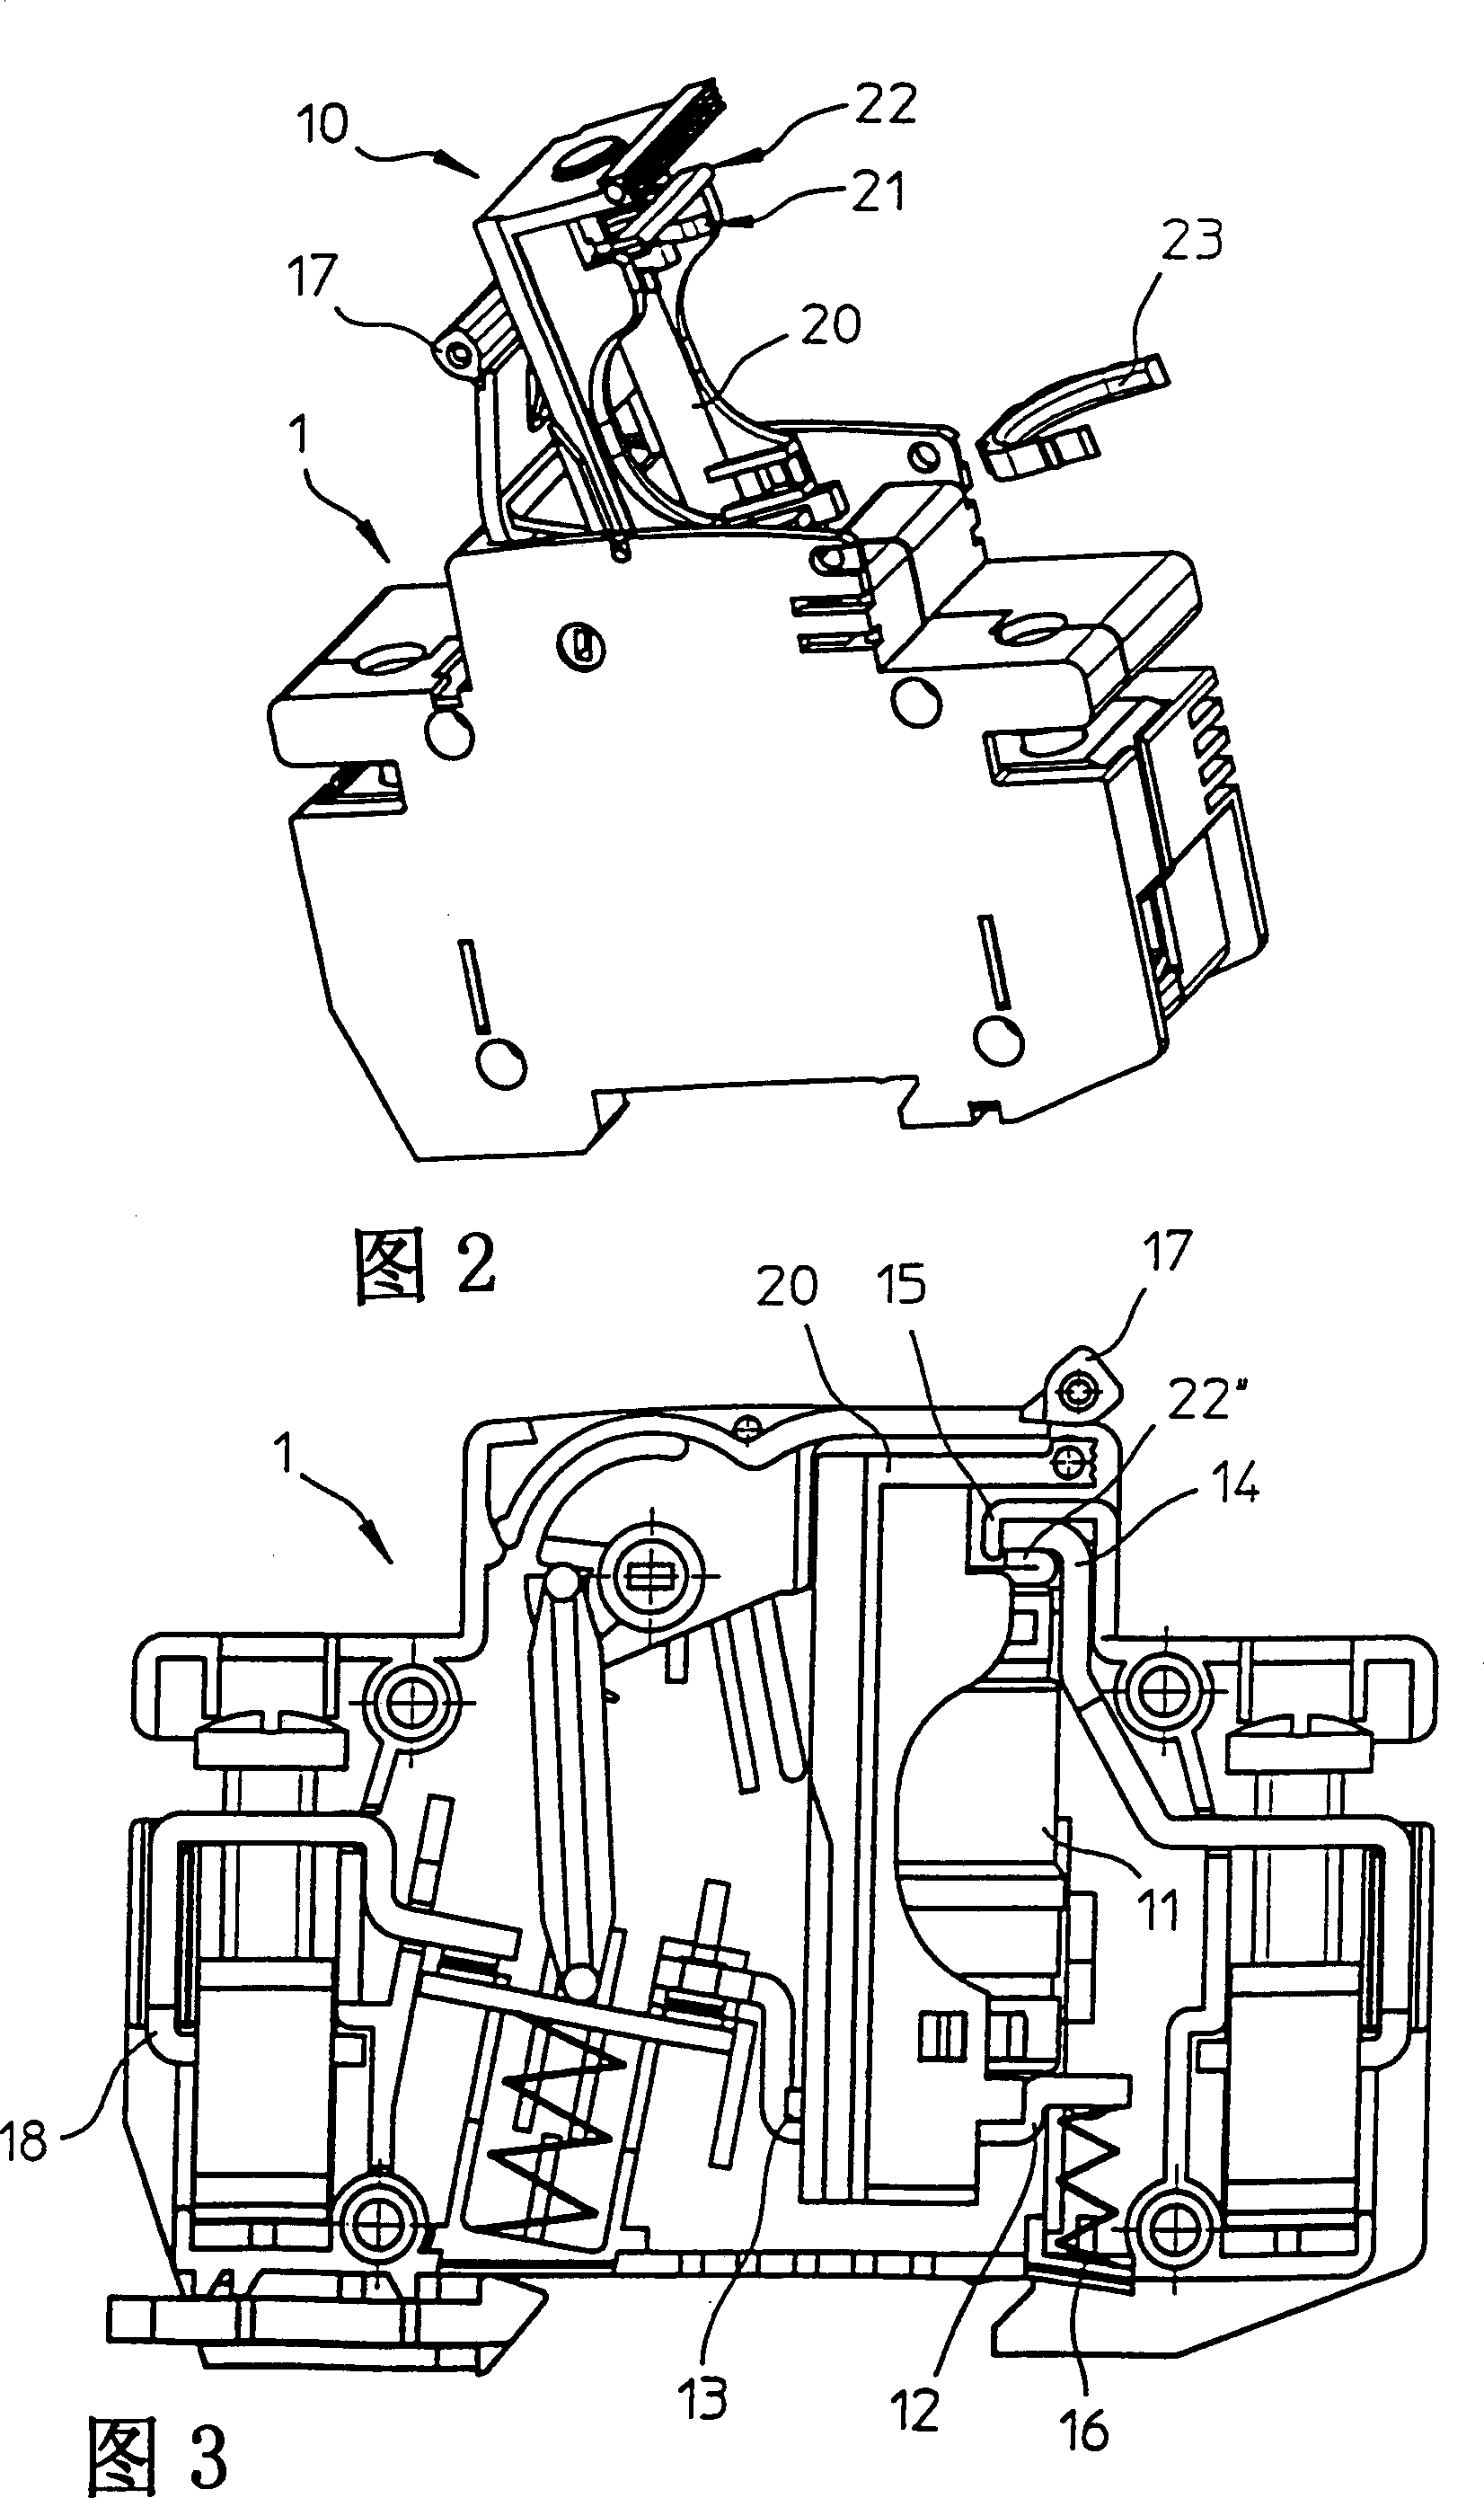 Electric appliance switch comprising a fuse seat